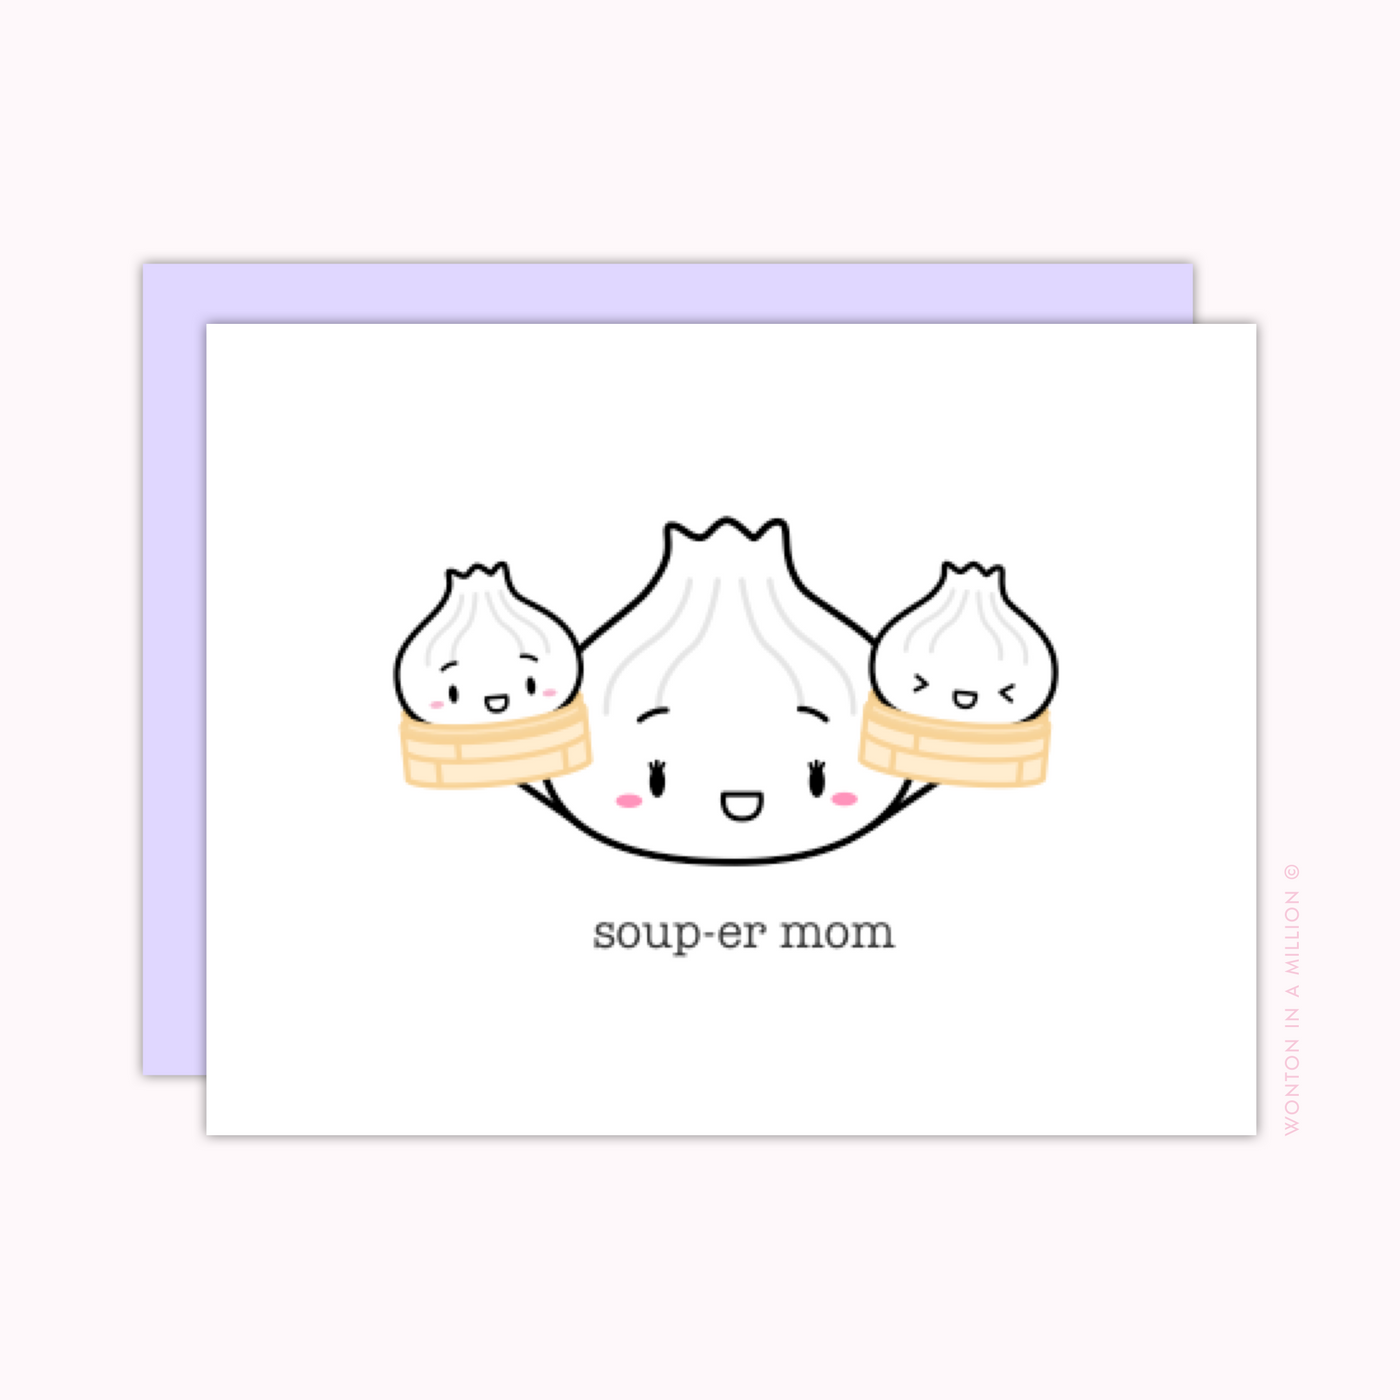 C035b | "Soup-er Mom" Duo Greeting Card (A2)